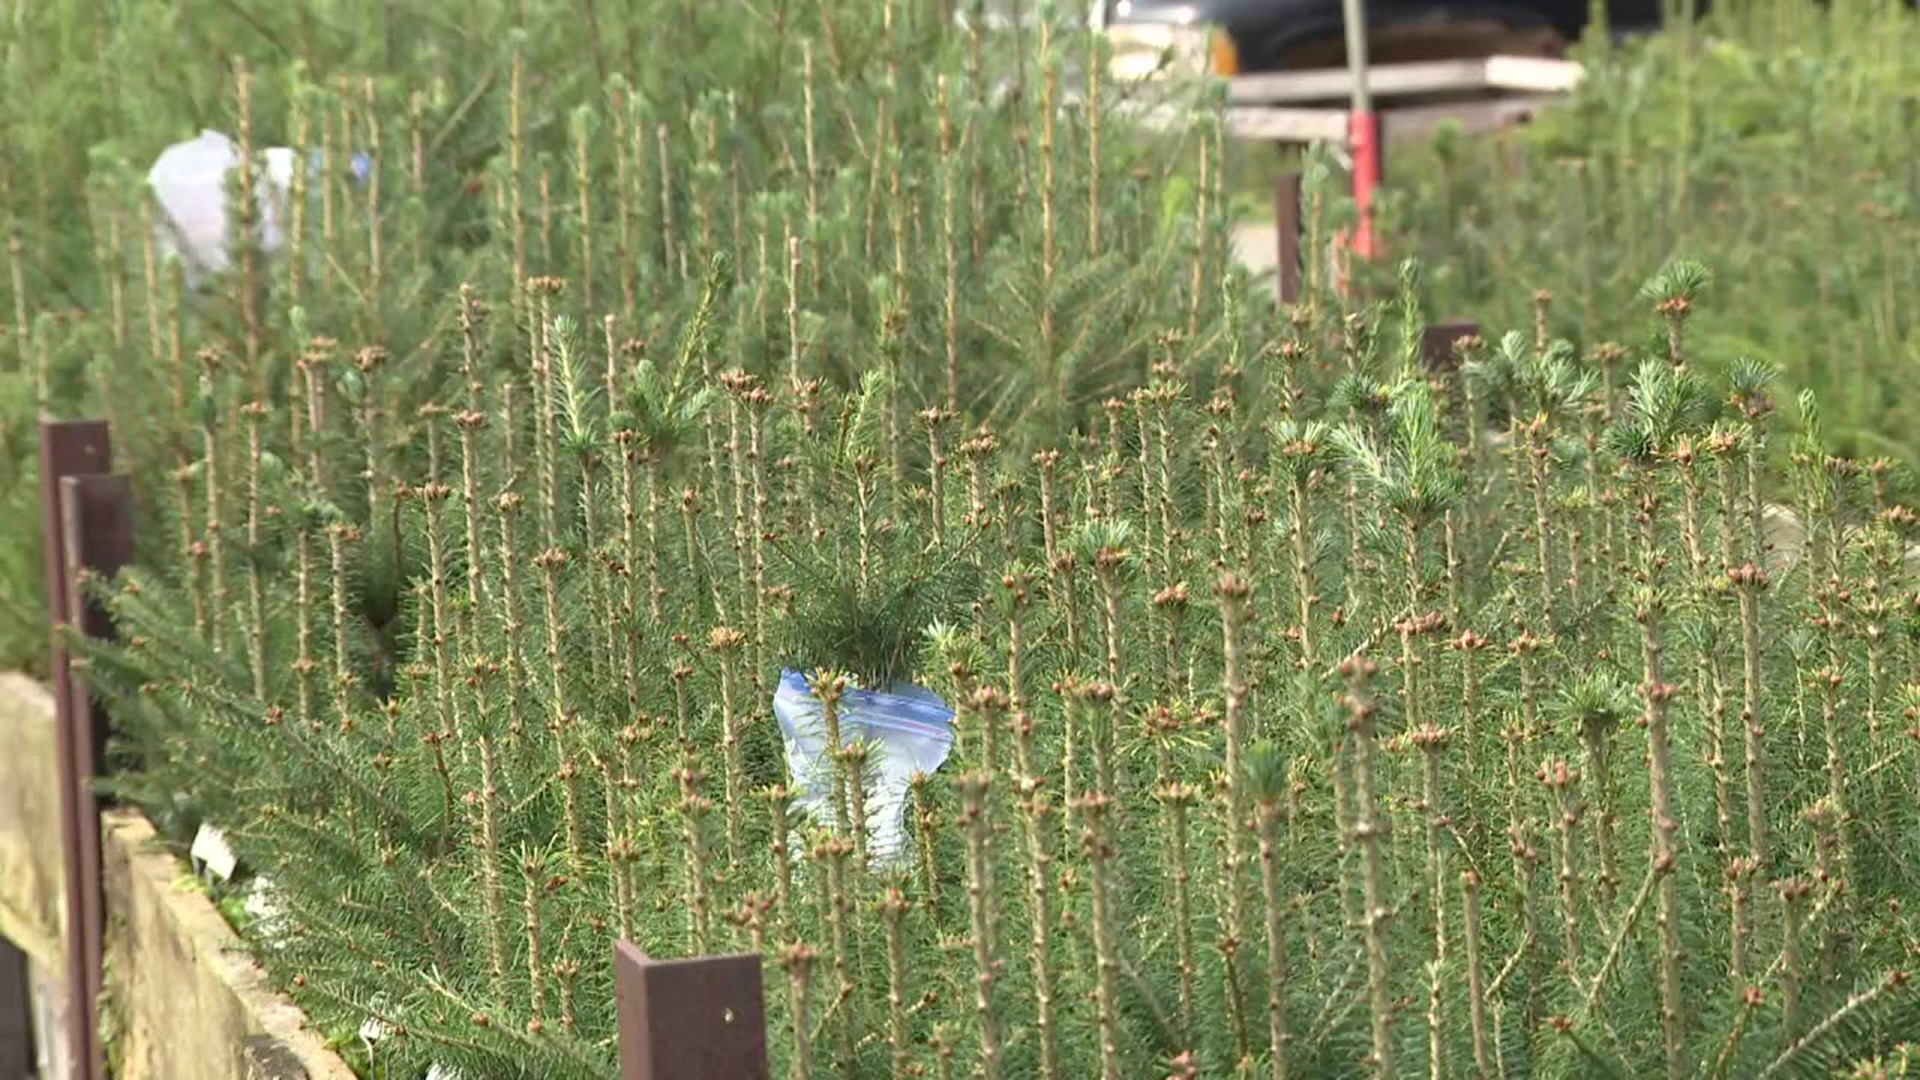 A Christmas tree farmer in Carbon County has been on a mission over the last few years to grow his own trees from seeds, a process that takes years to complete.